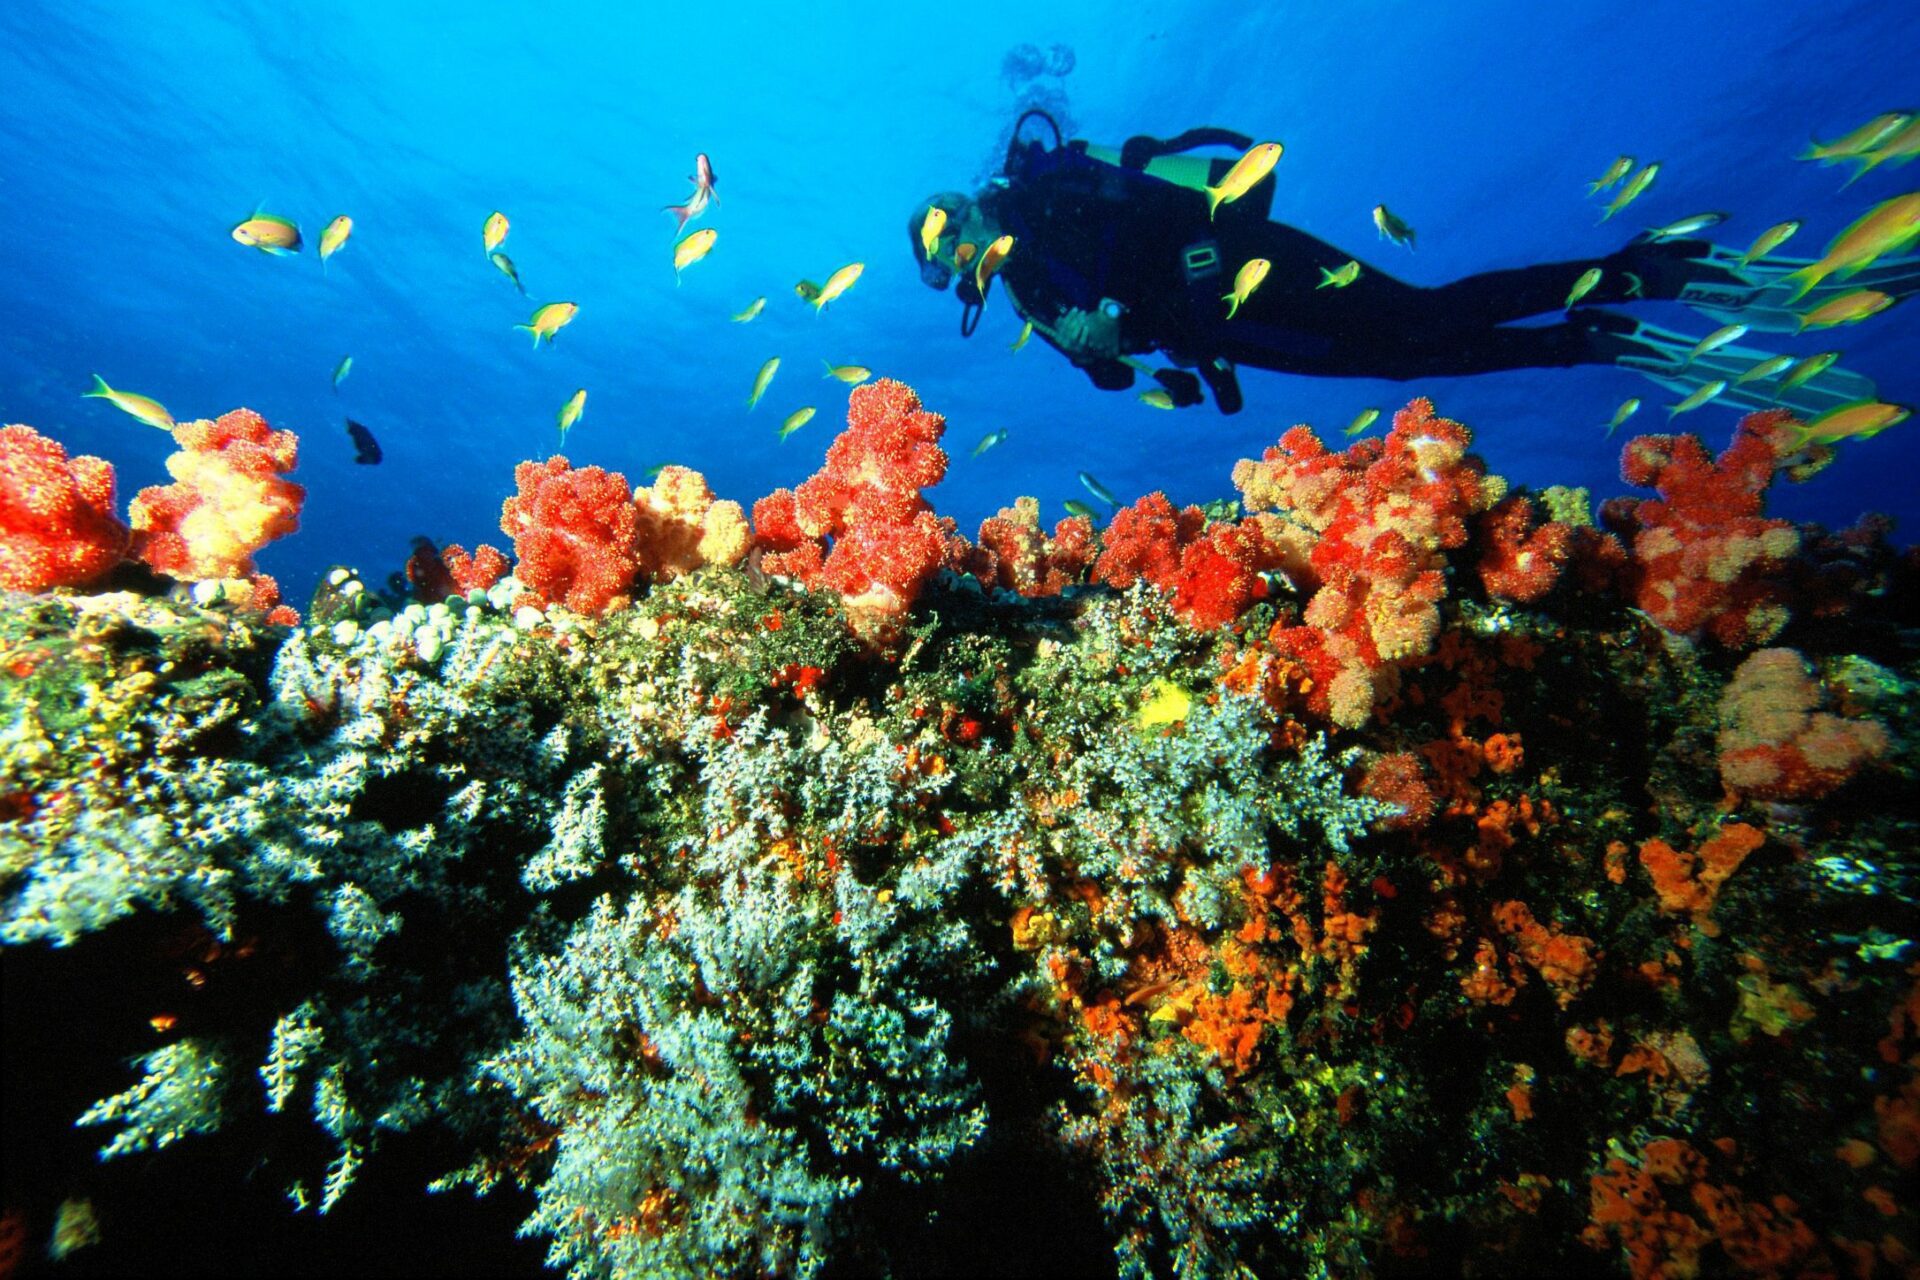 Diver above colorful coral